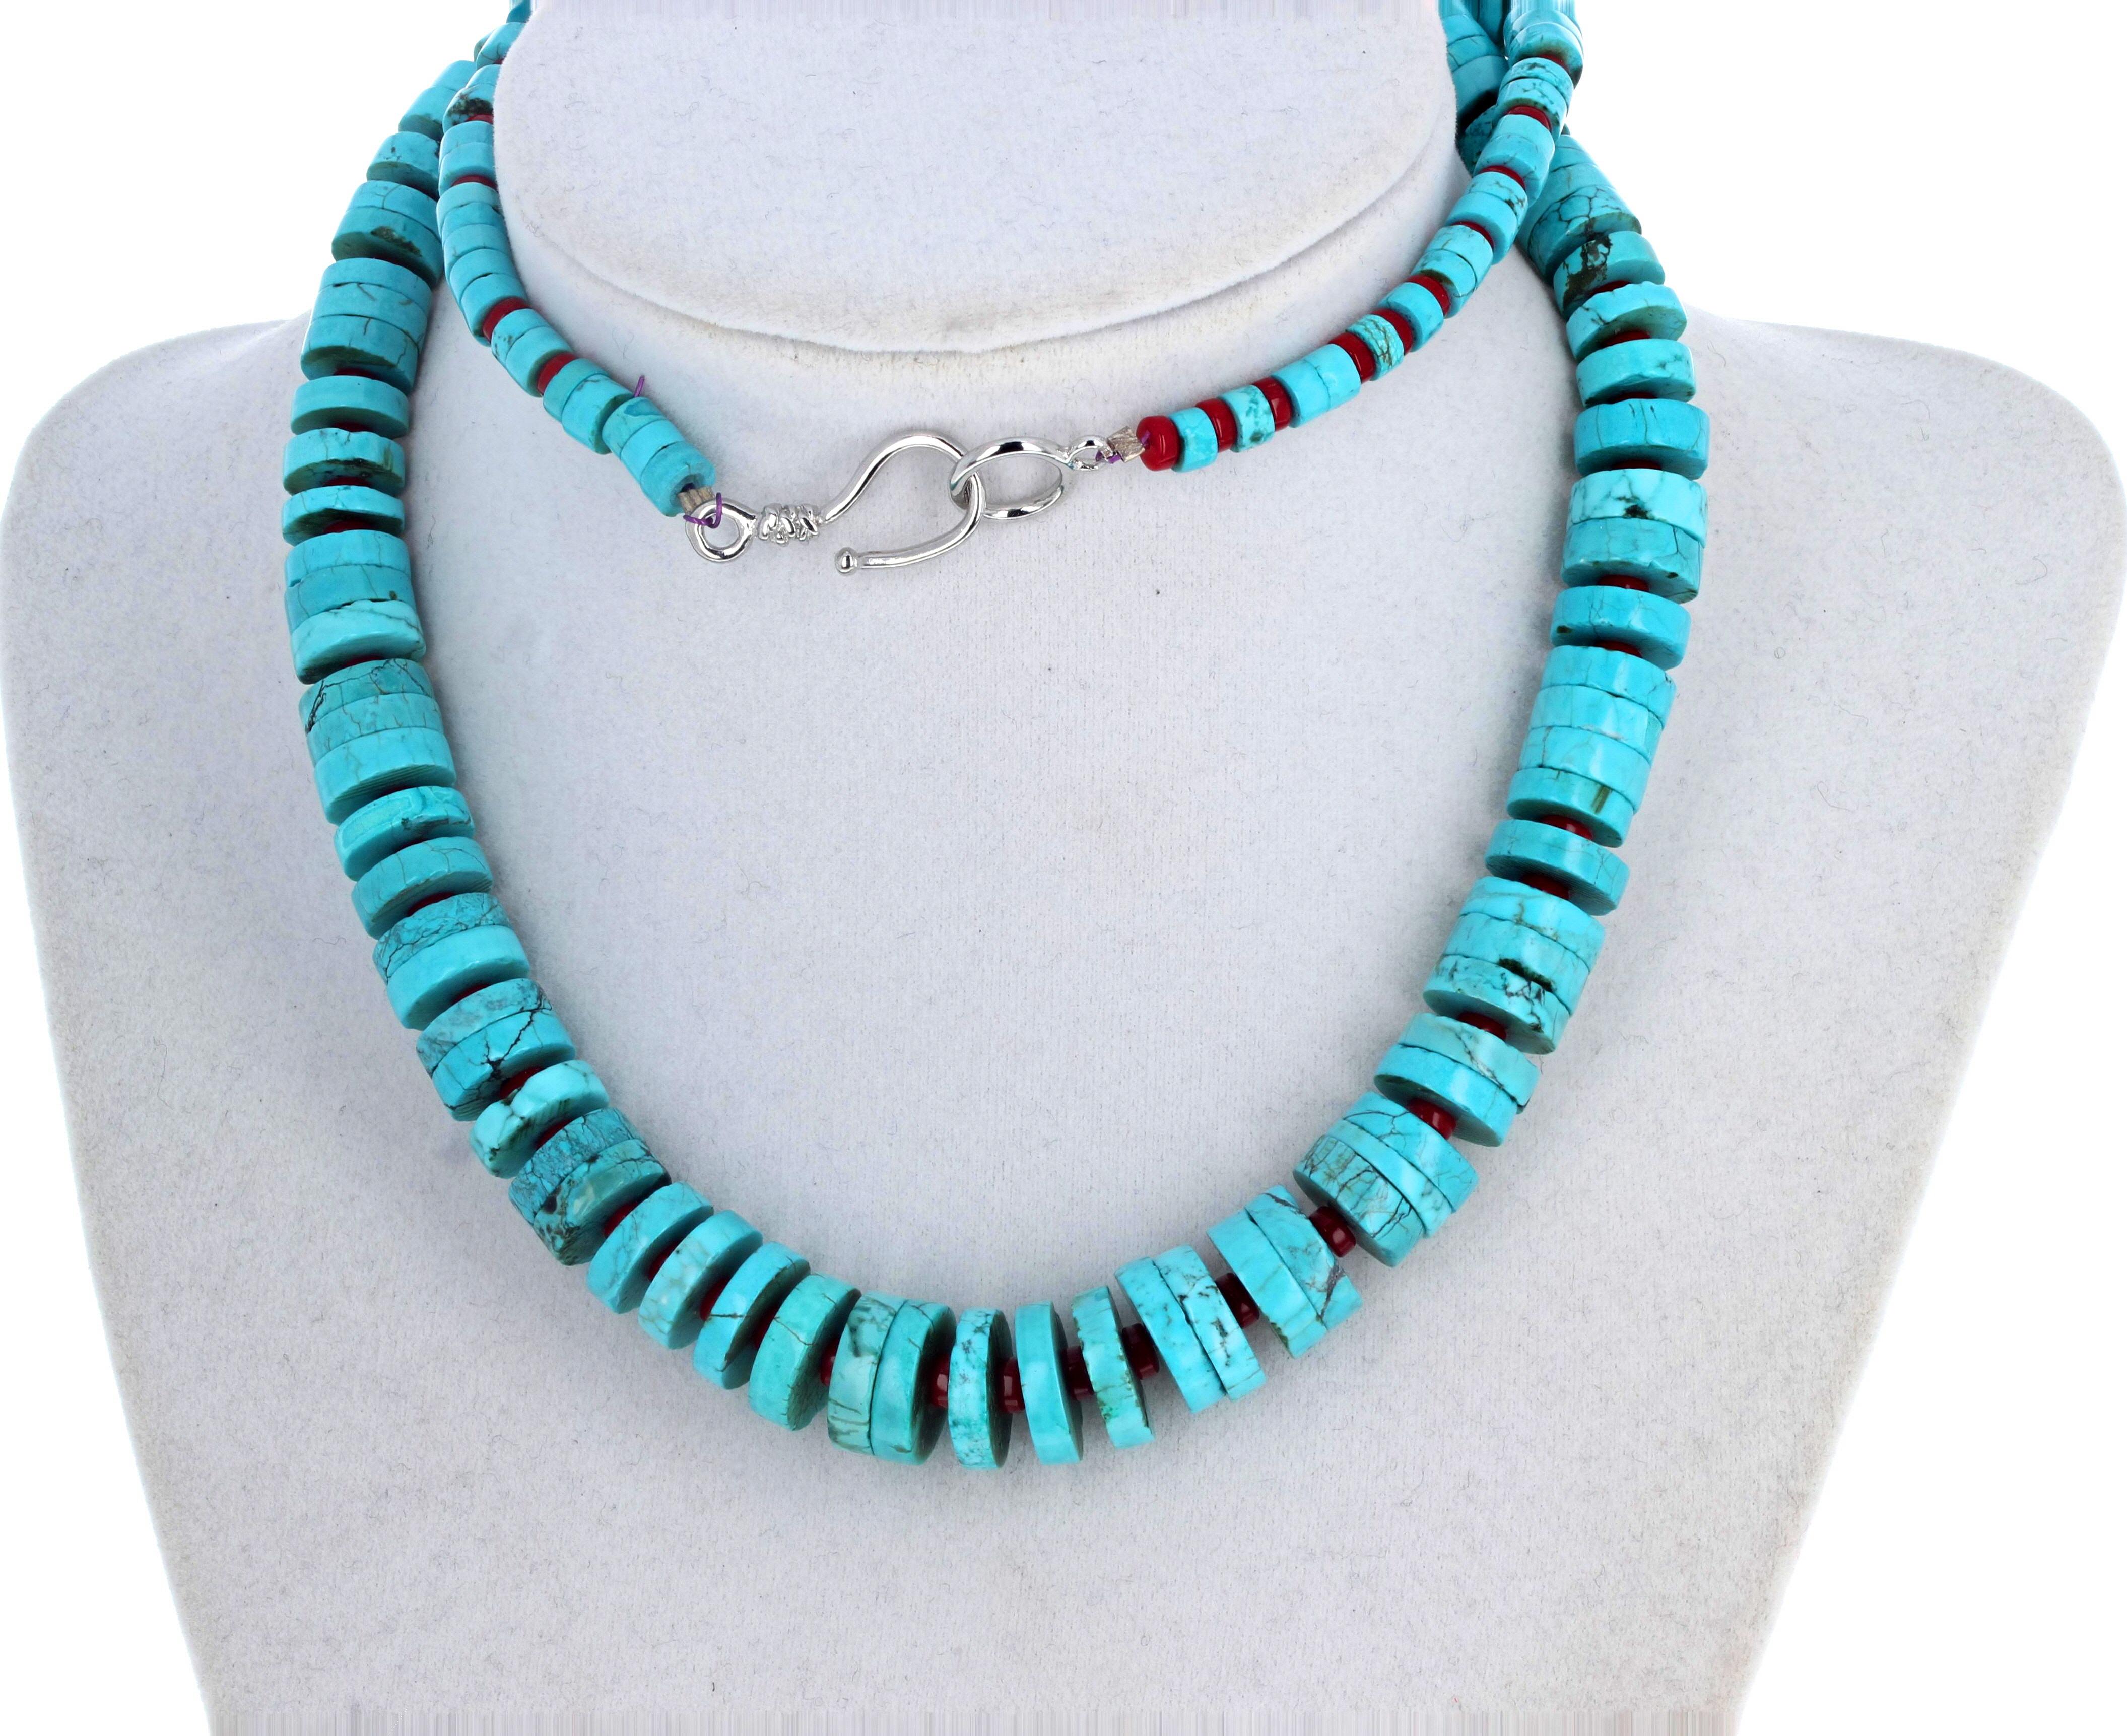 This lovely graduated highly polished slices of natural Turquois necklace enhanced with natural red Coral is 25 inches long.  The largest Coral are approximately 13mm and the clasp is silver.  